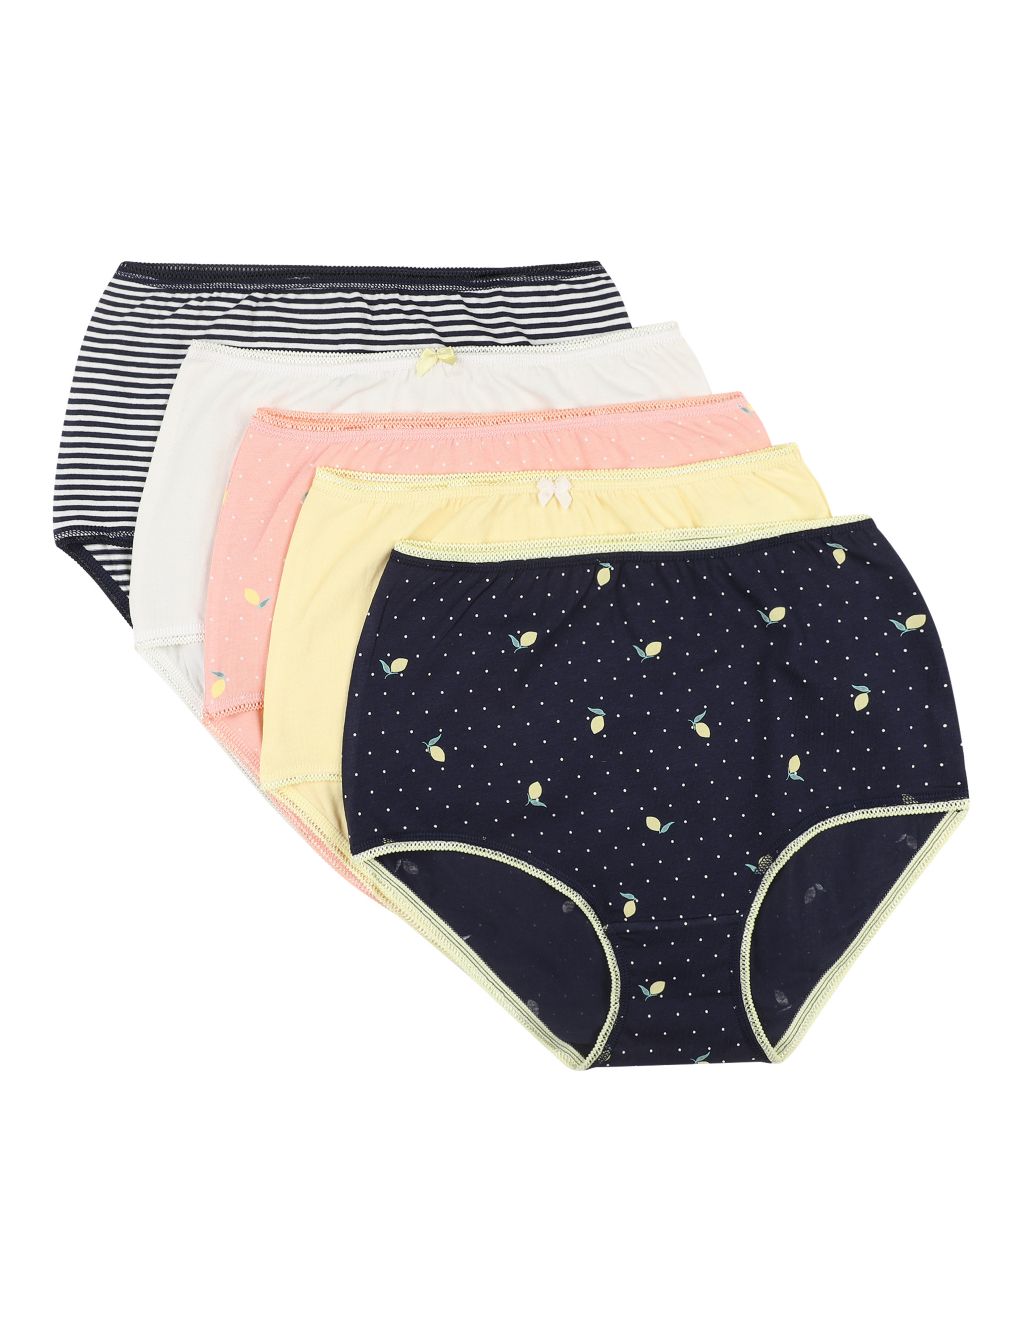 5pk Cotton Rich Lycra® High Rise Knickers image 1